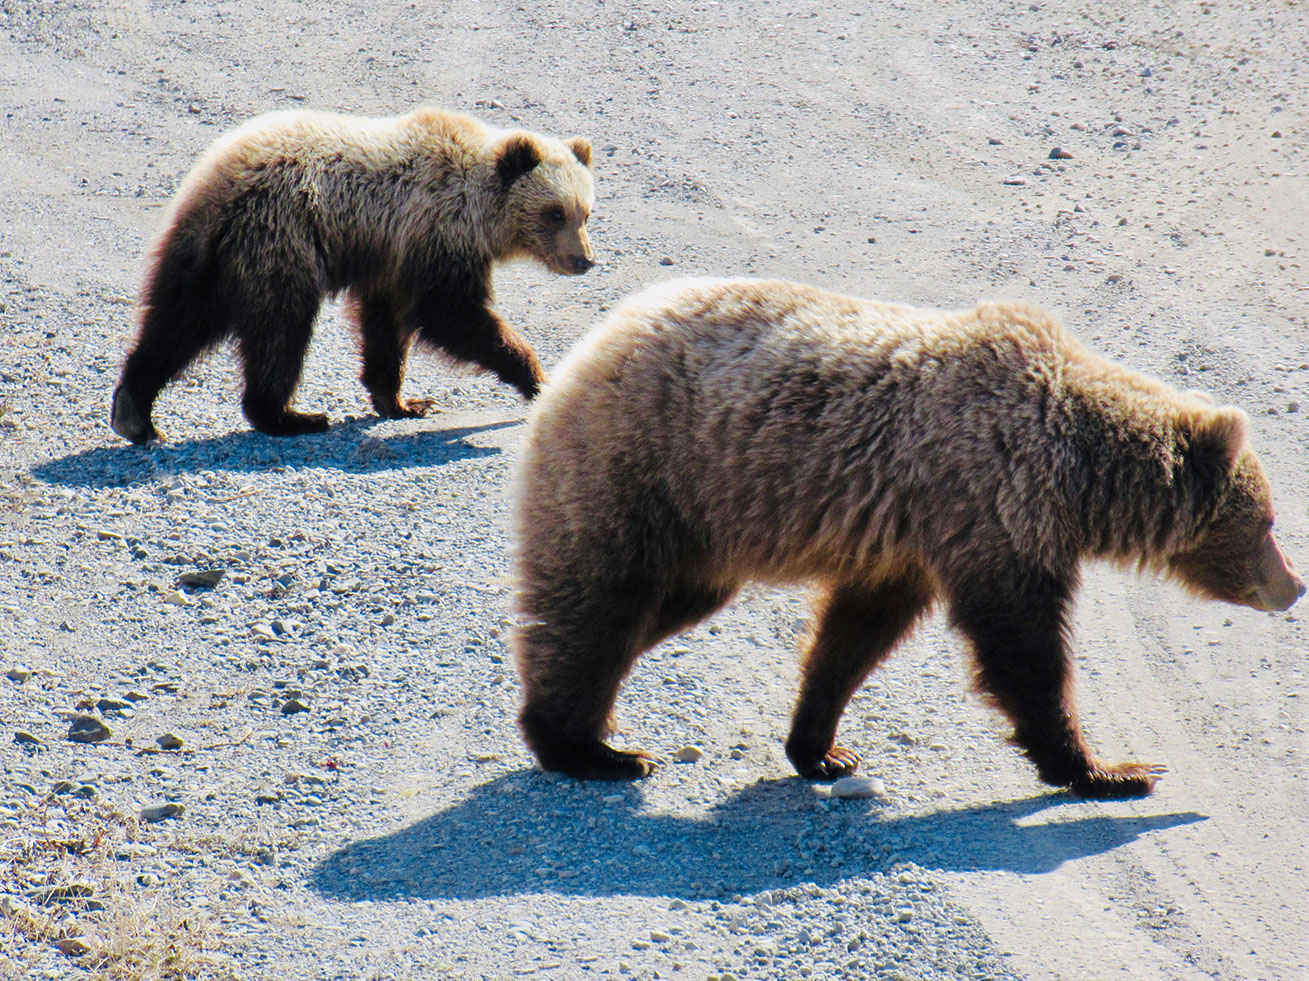 A rare sight of Grizzly Bears up close during the Denali bus tour